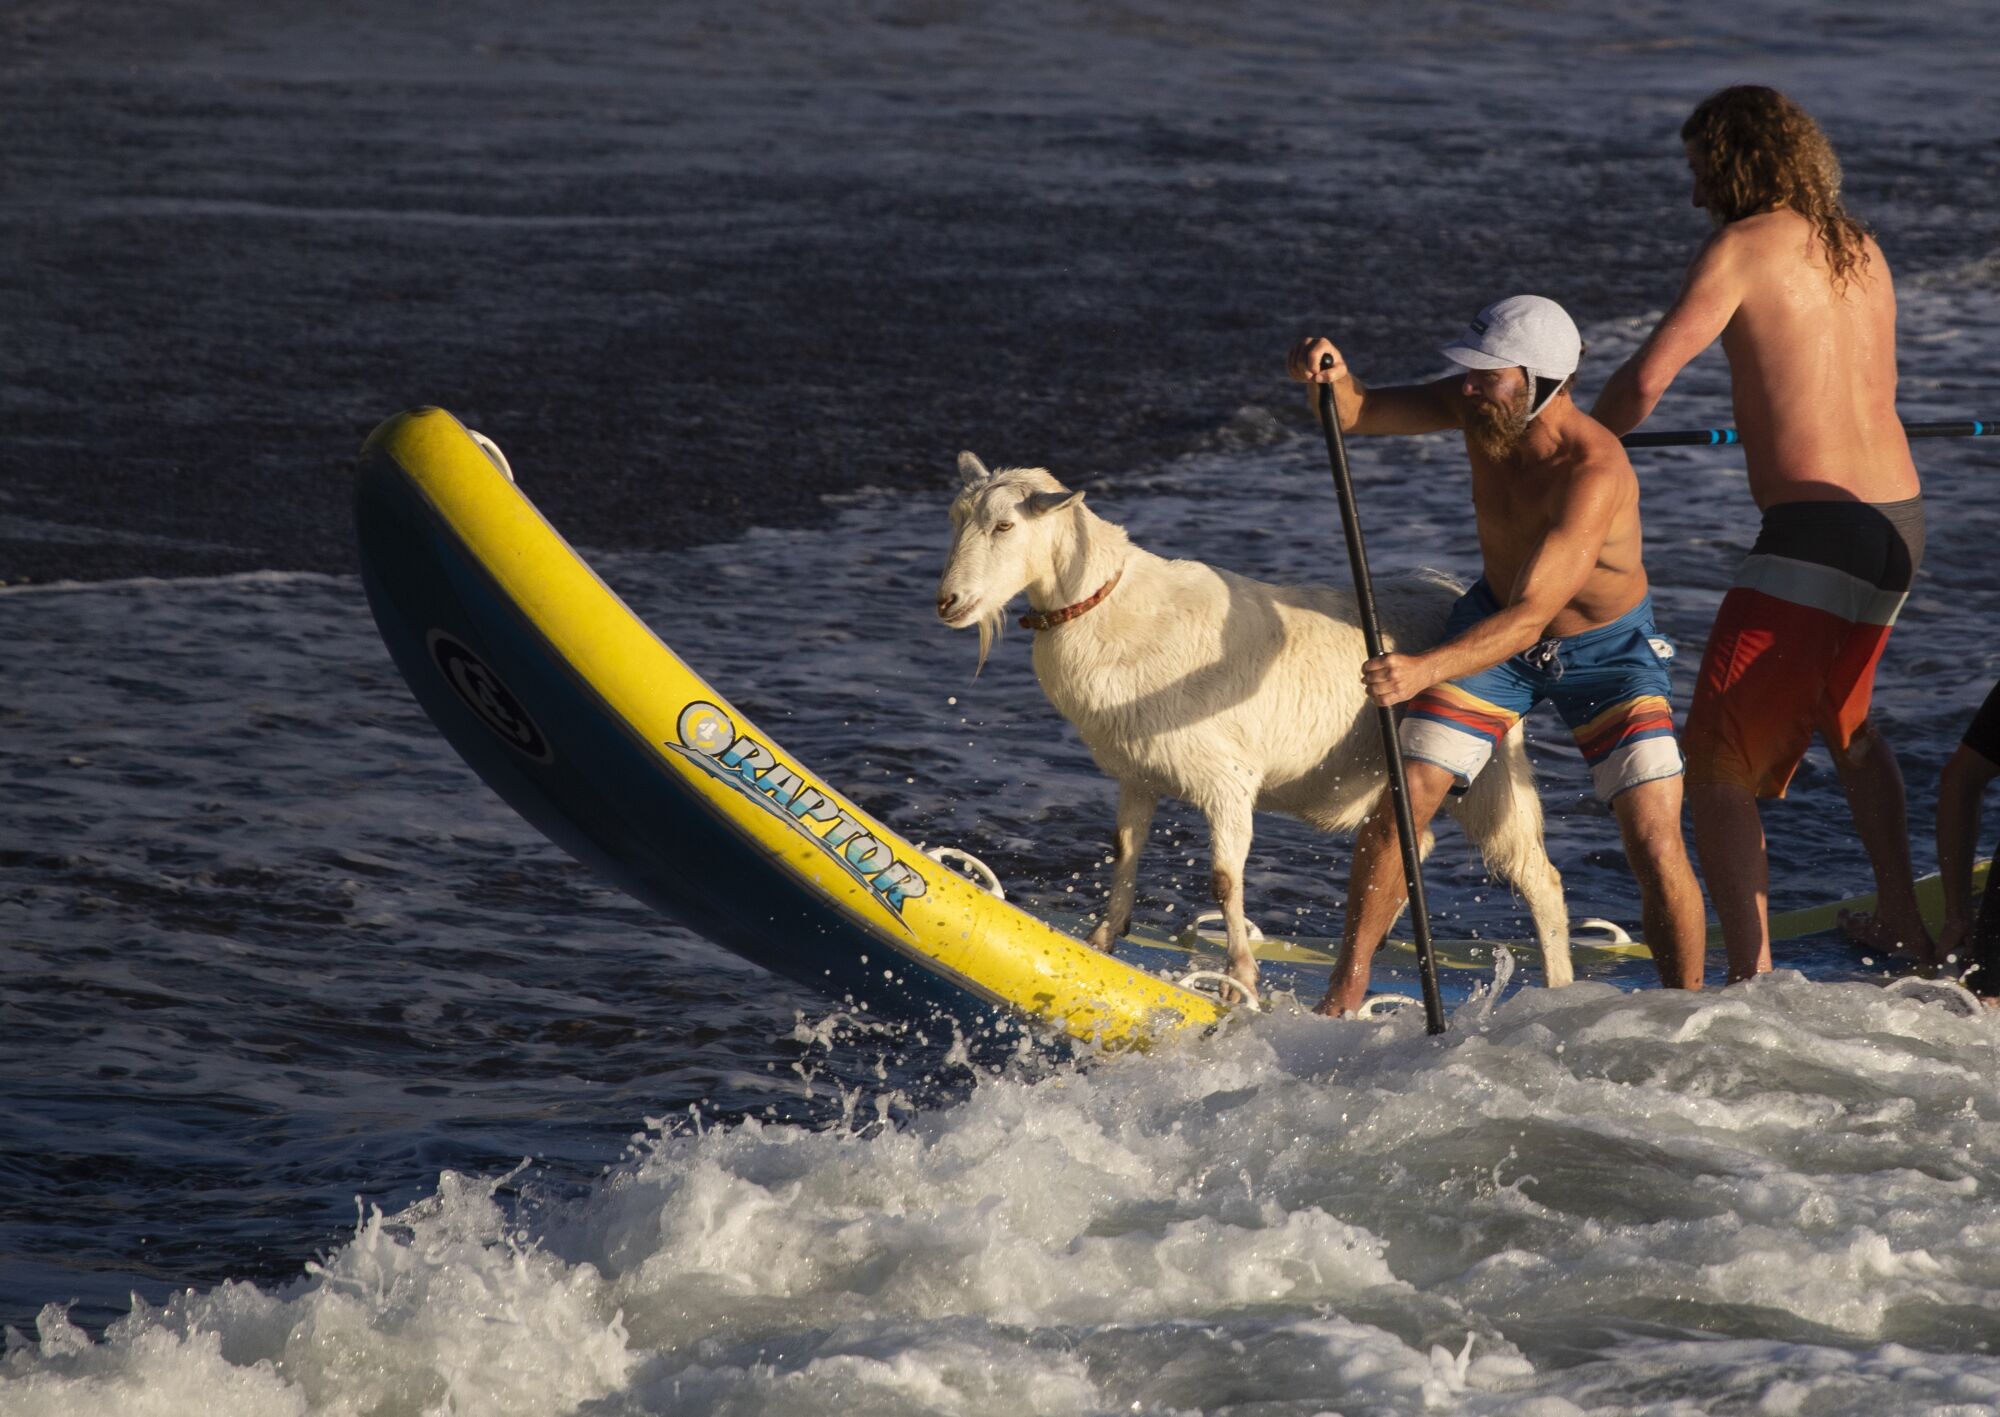 Surfing goat Pismo the Kid 